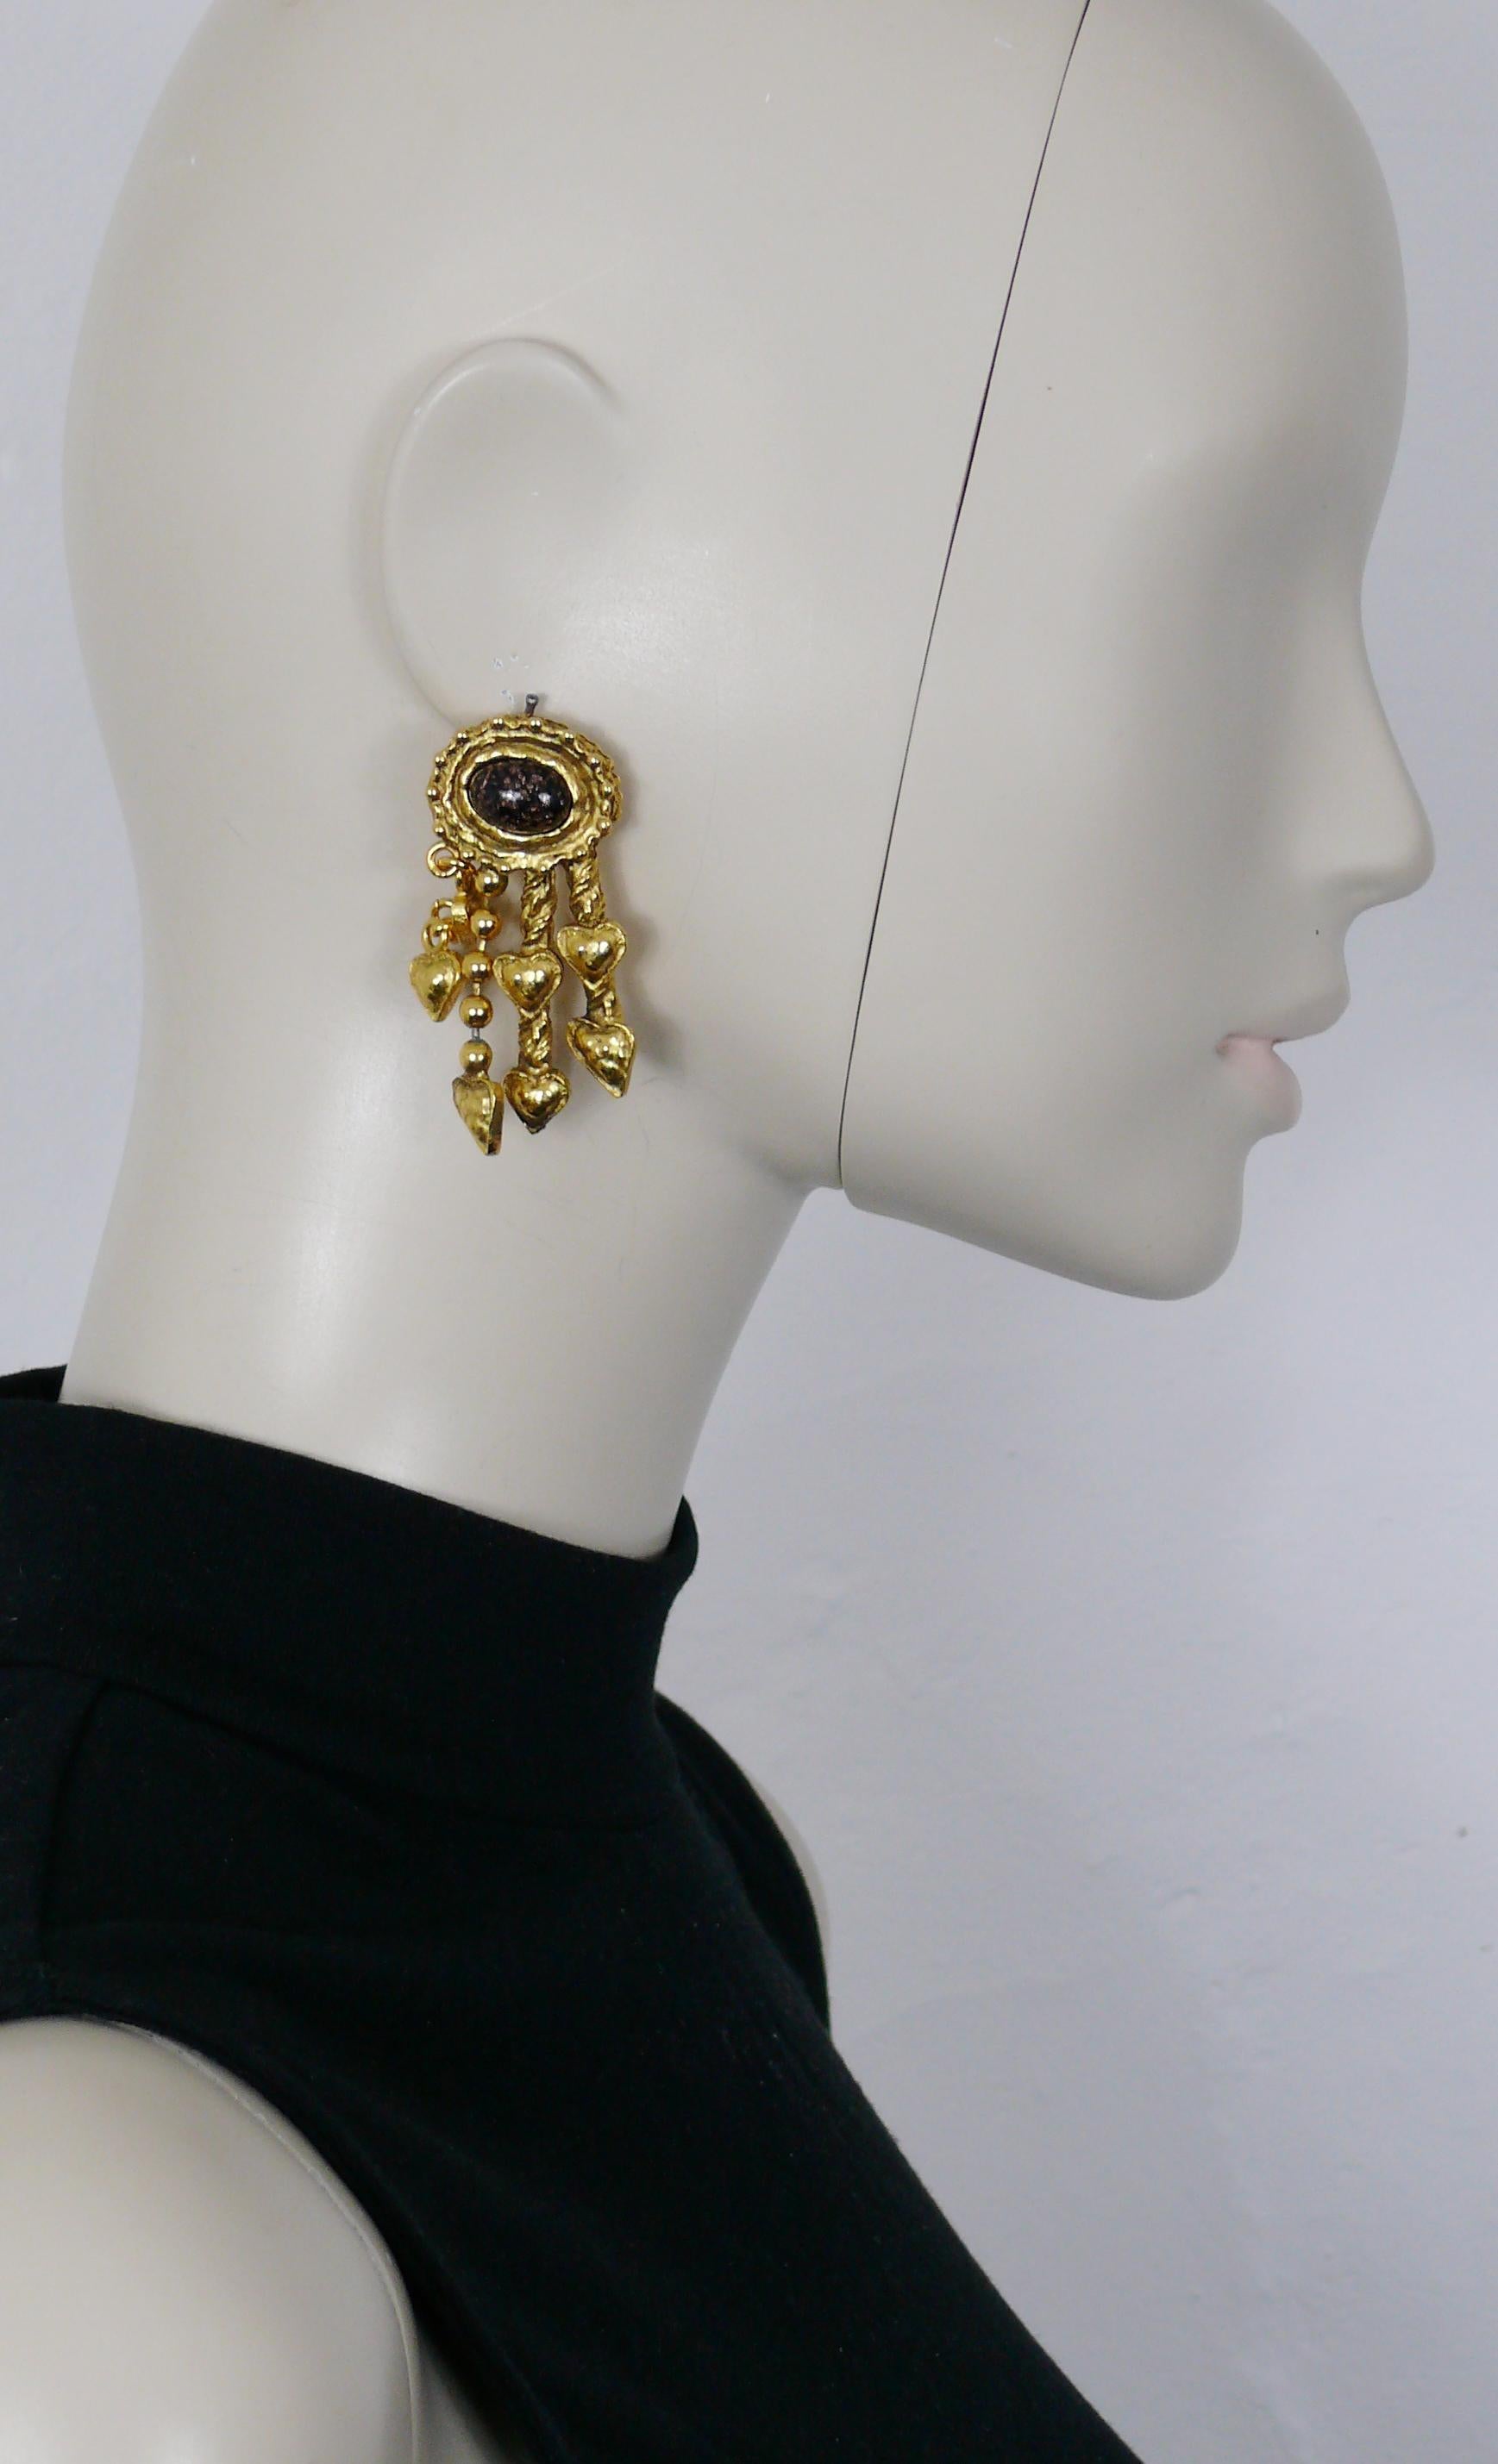 CHRISTIAN LACROIX vintage textured gold toned dangling earrings (clip-on) embellished with a glittering brown oval glass cabochon and heart charms.

Embossed CHRISTIAN LACROIX CL Made in France.

Indicative measurements : max. height approx. 5.8 cm